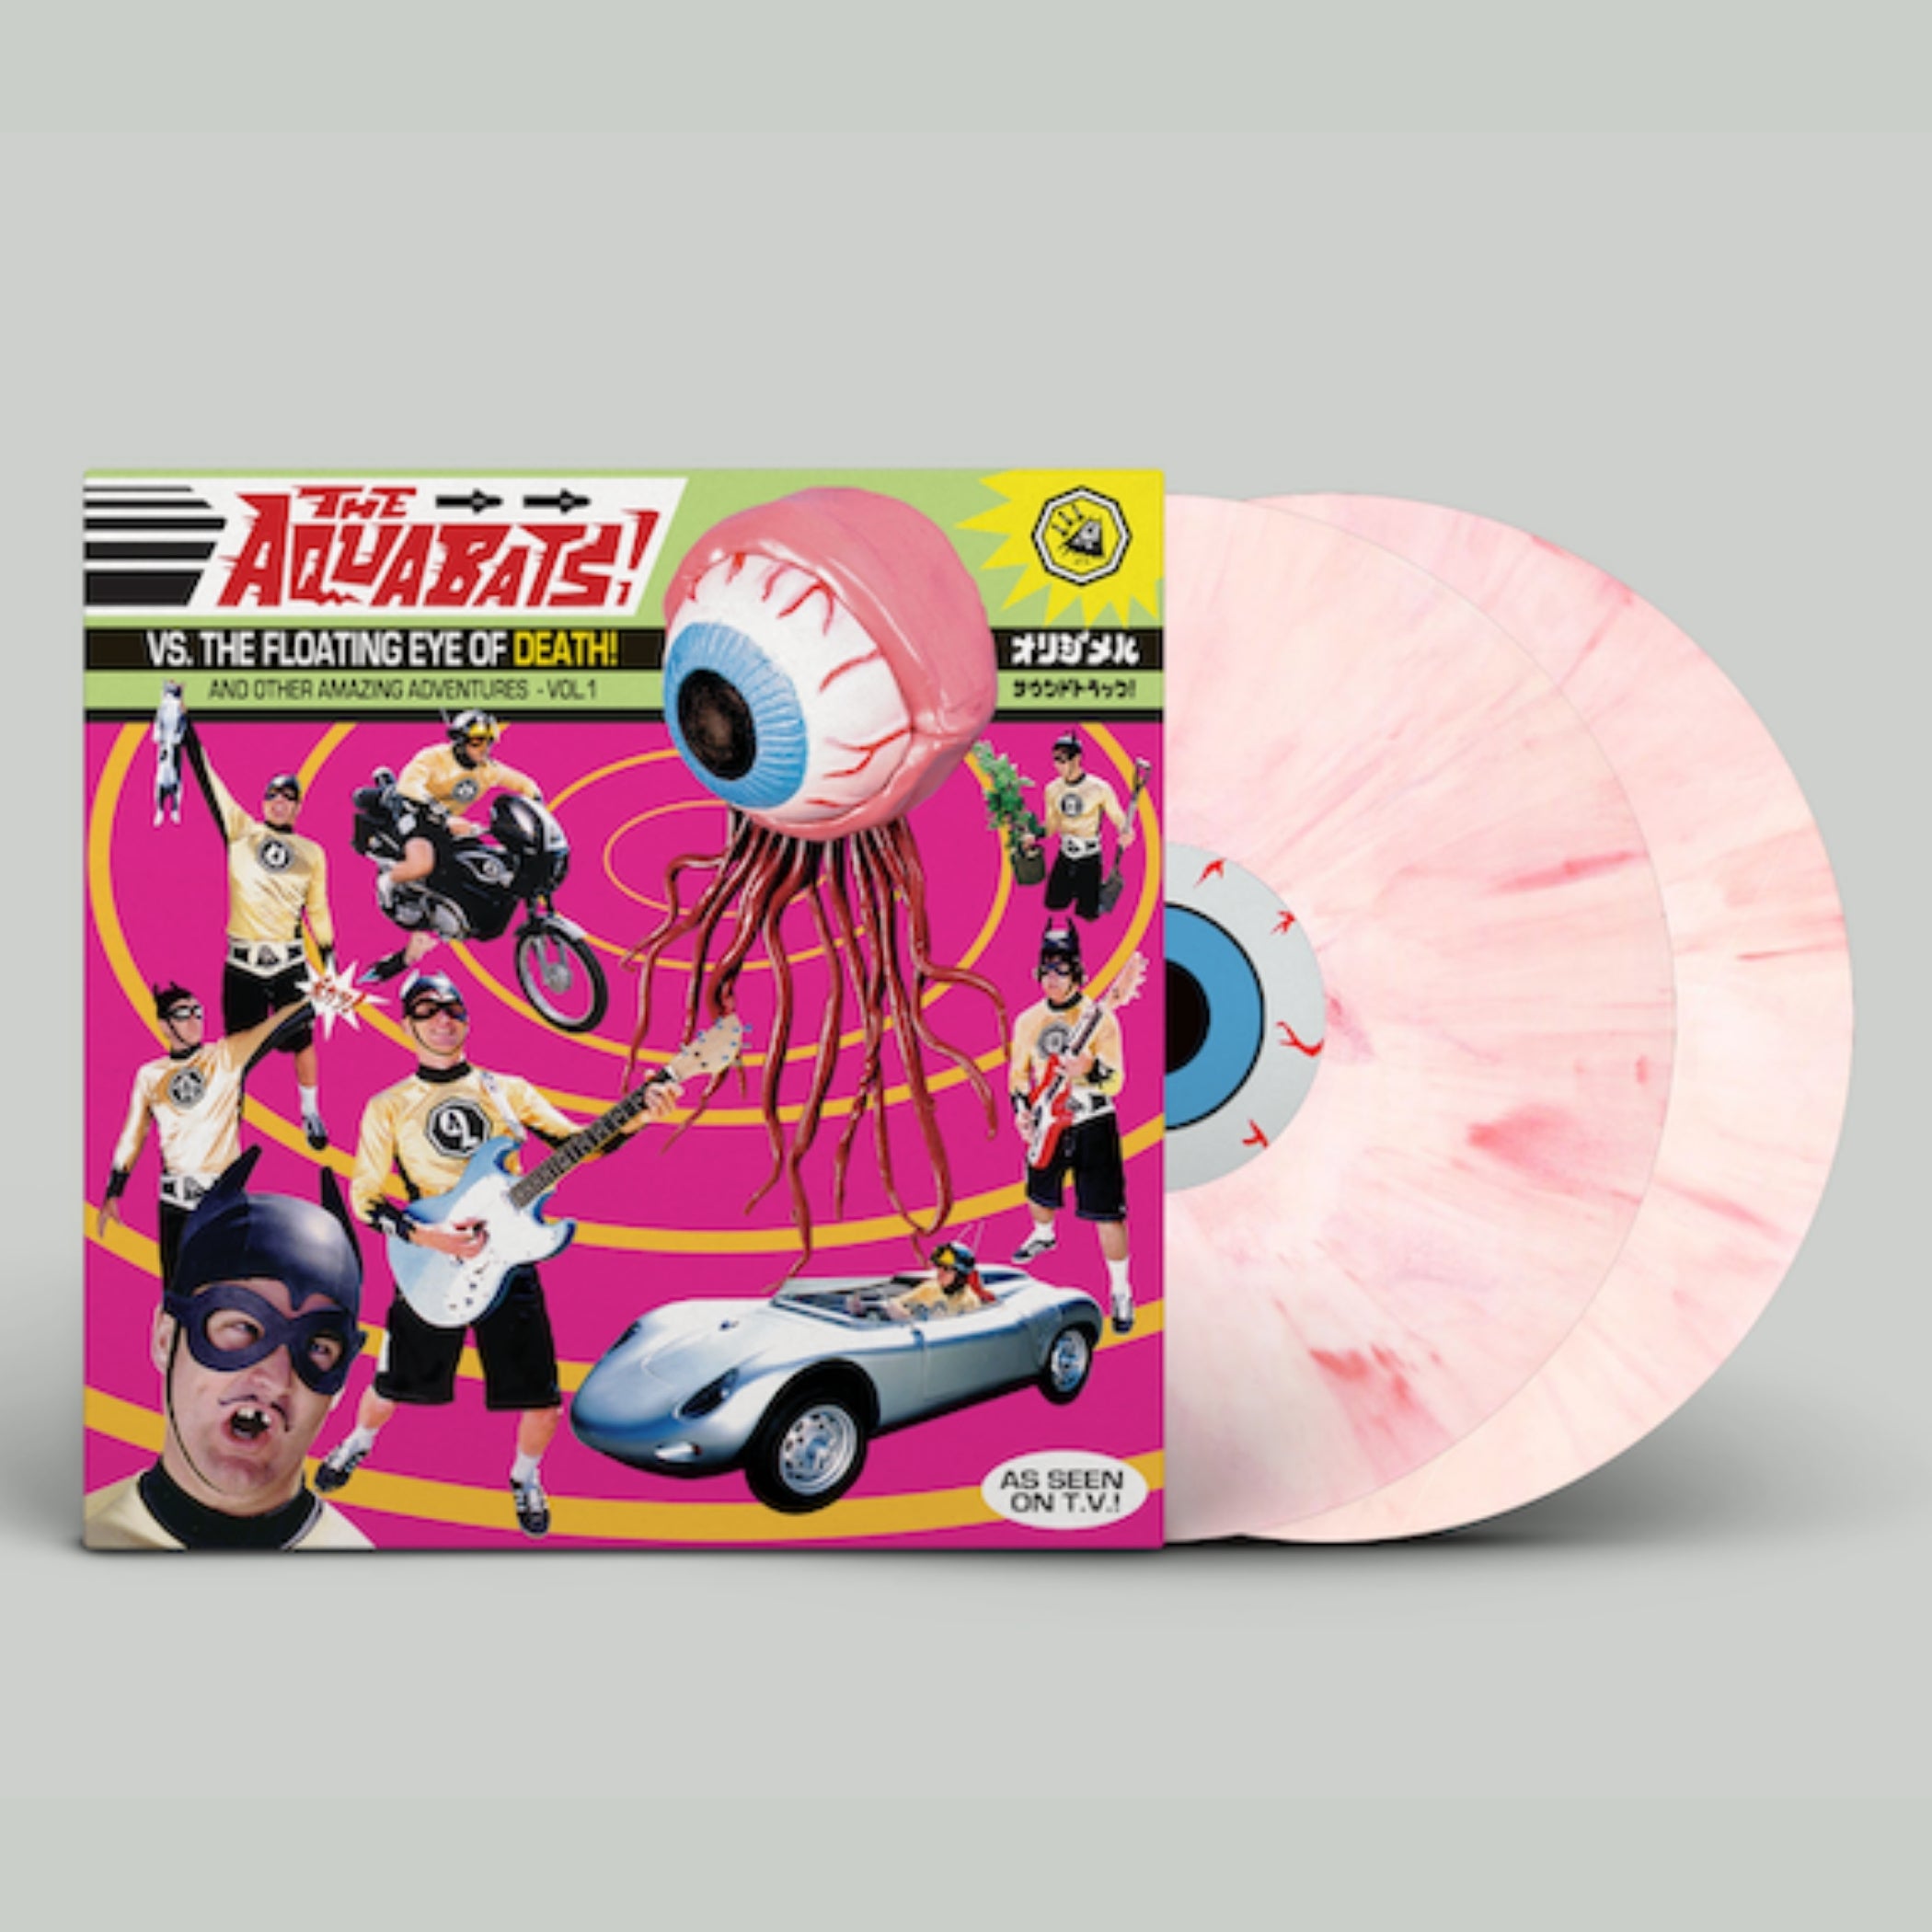 PRE-ORDER The Aquabats! Vs. The Floating Eye of Death! gloopy-Exclusive "Bloodshot" Pink Double LP